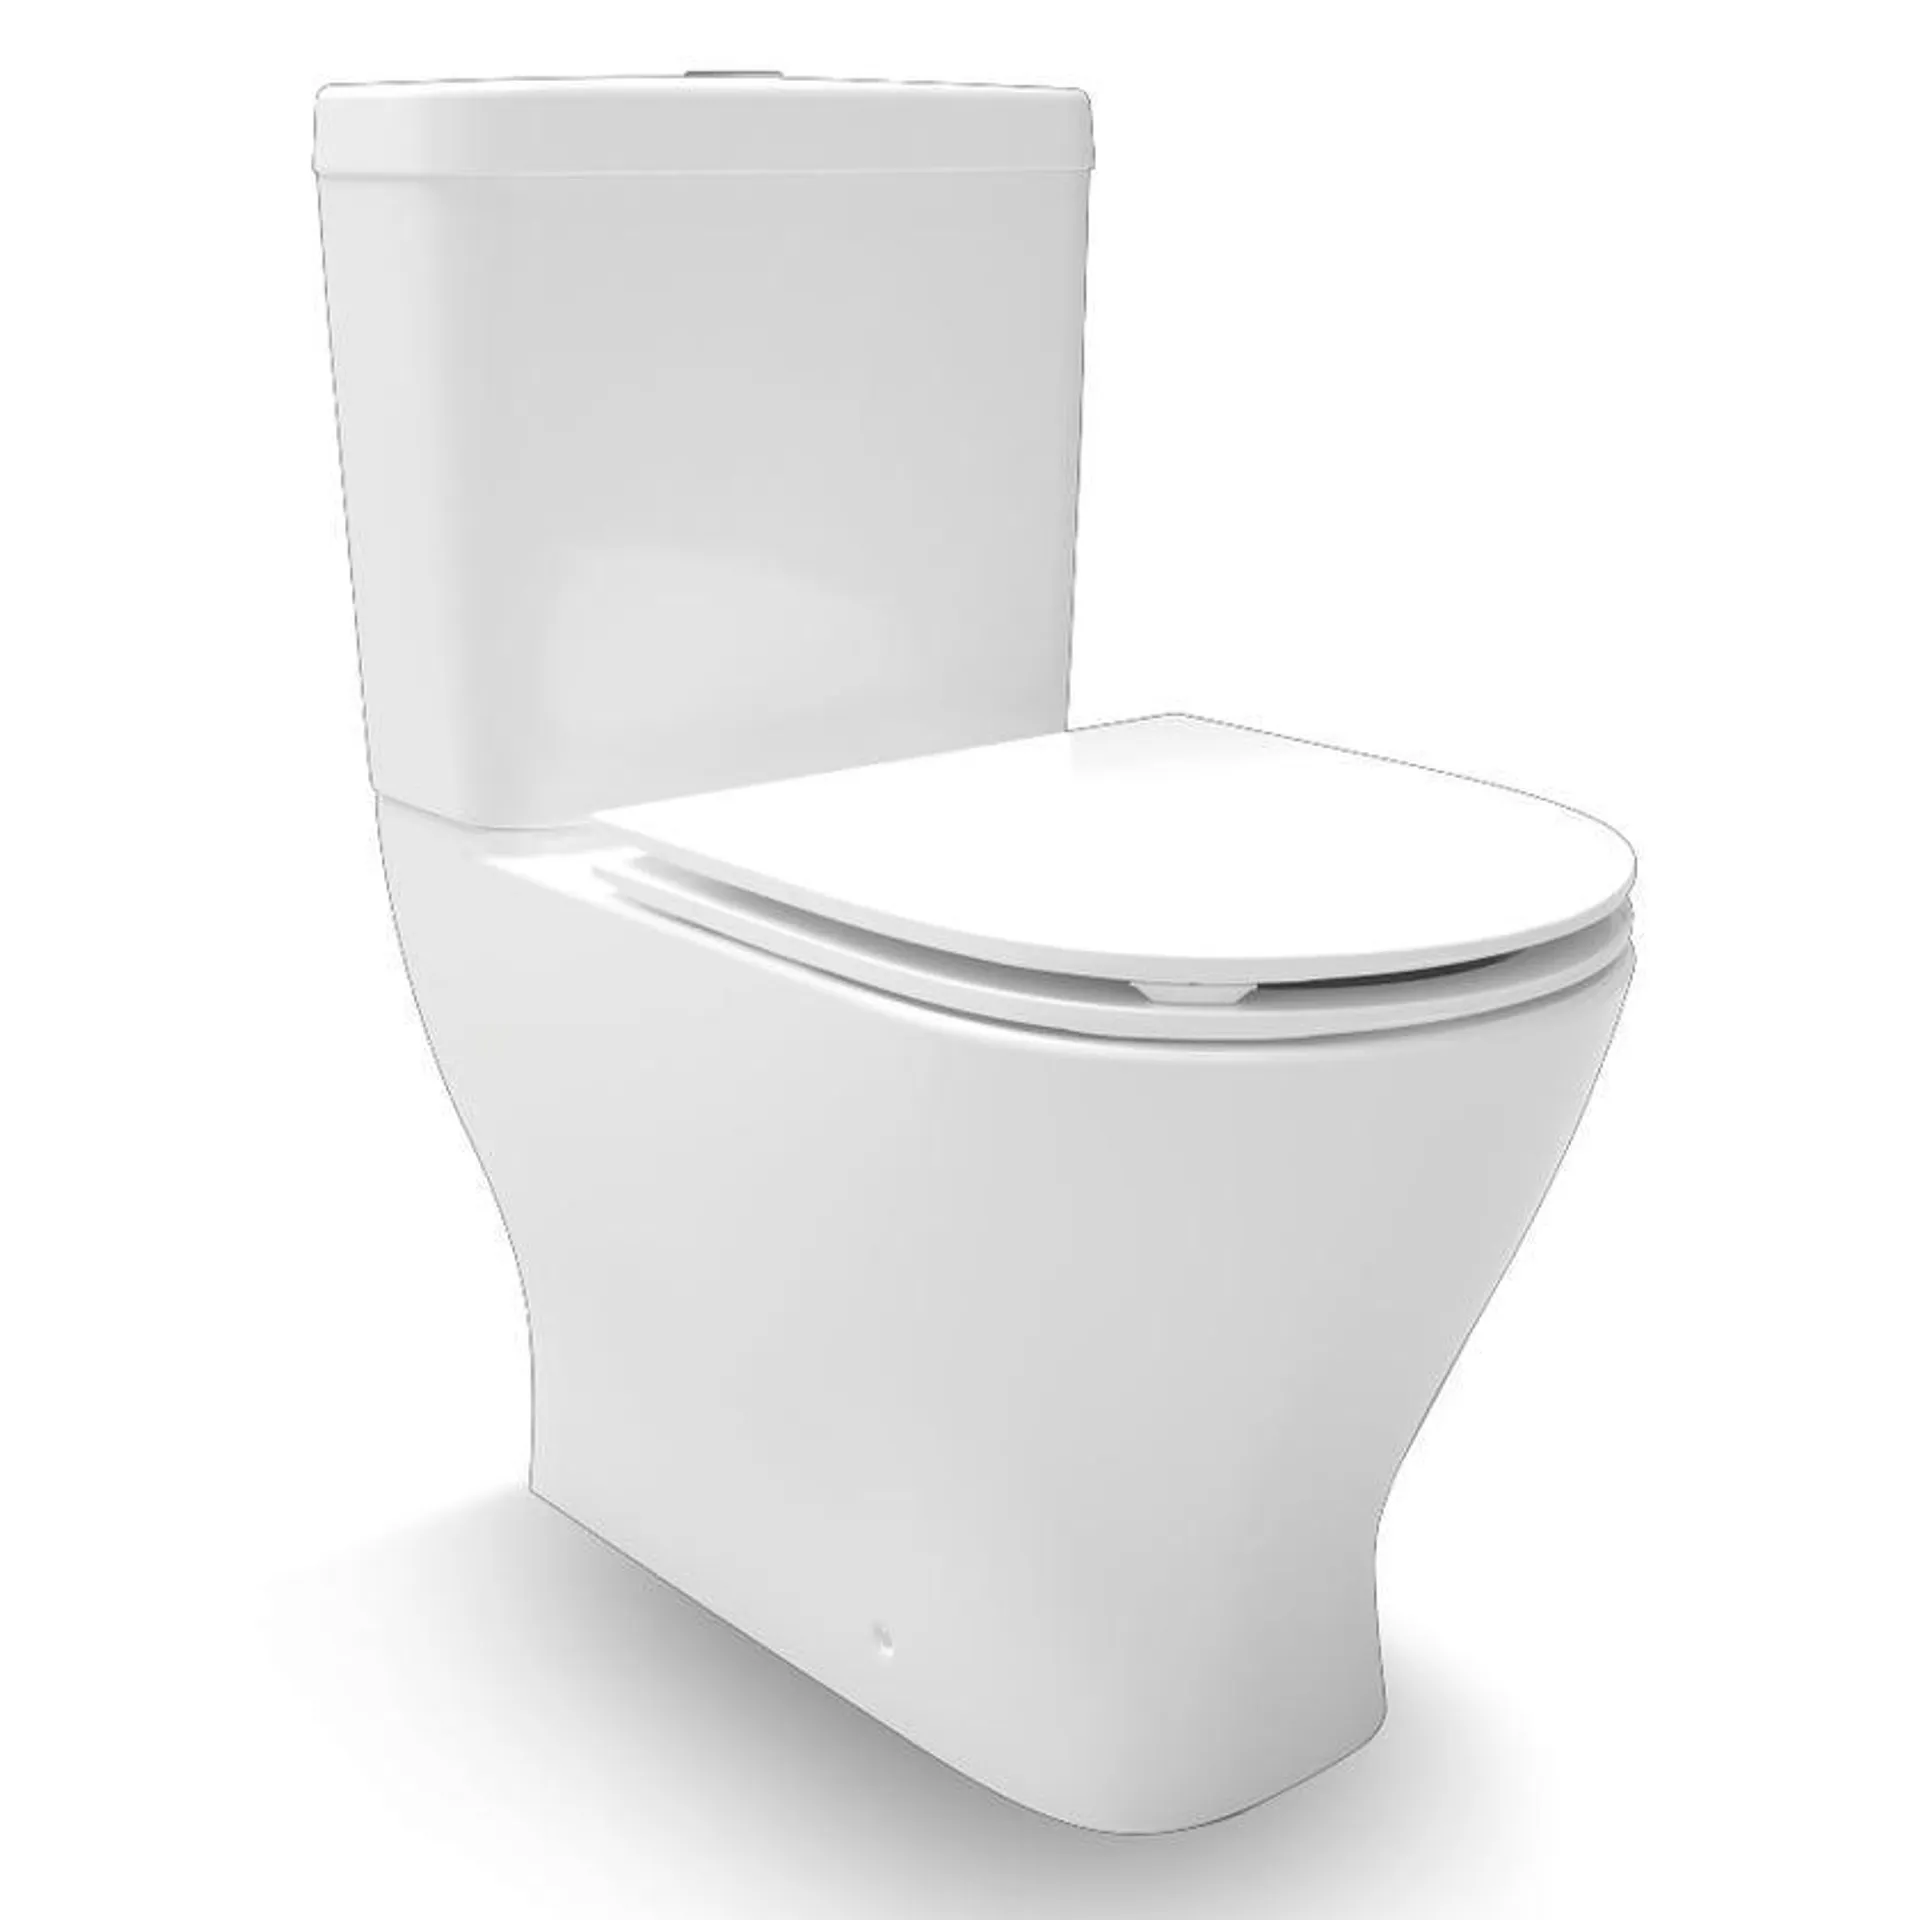 Kohler 21001A0 Reach II Back to Wall Toilet Suite with Slim Seat - Back Entry / Universal Trap